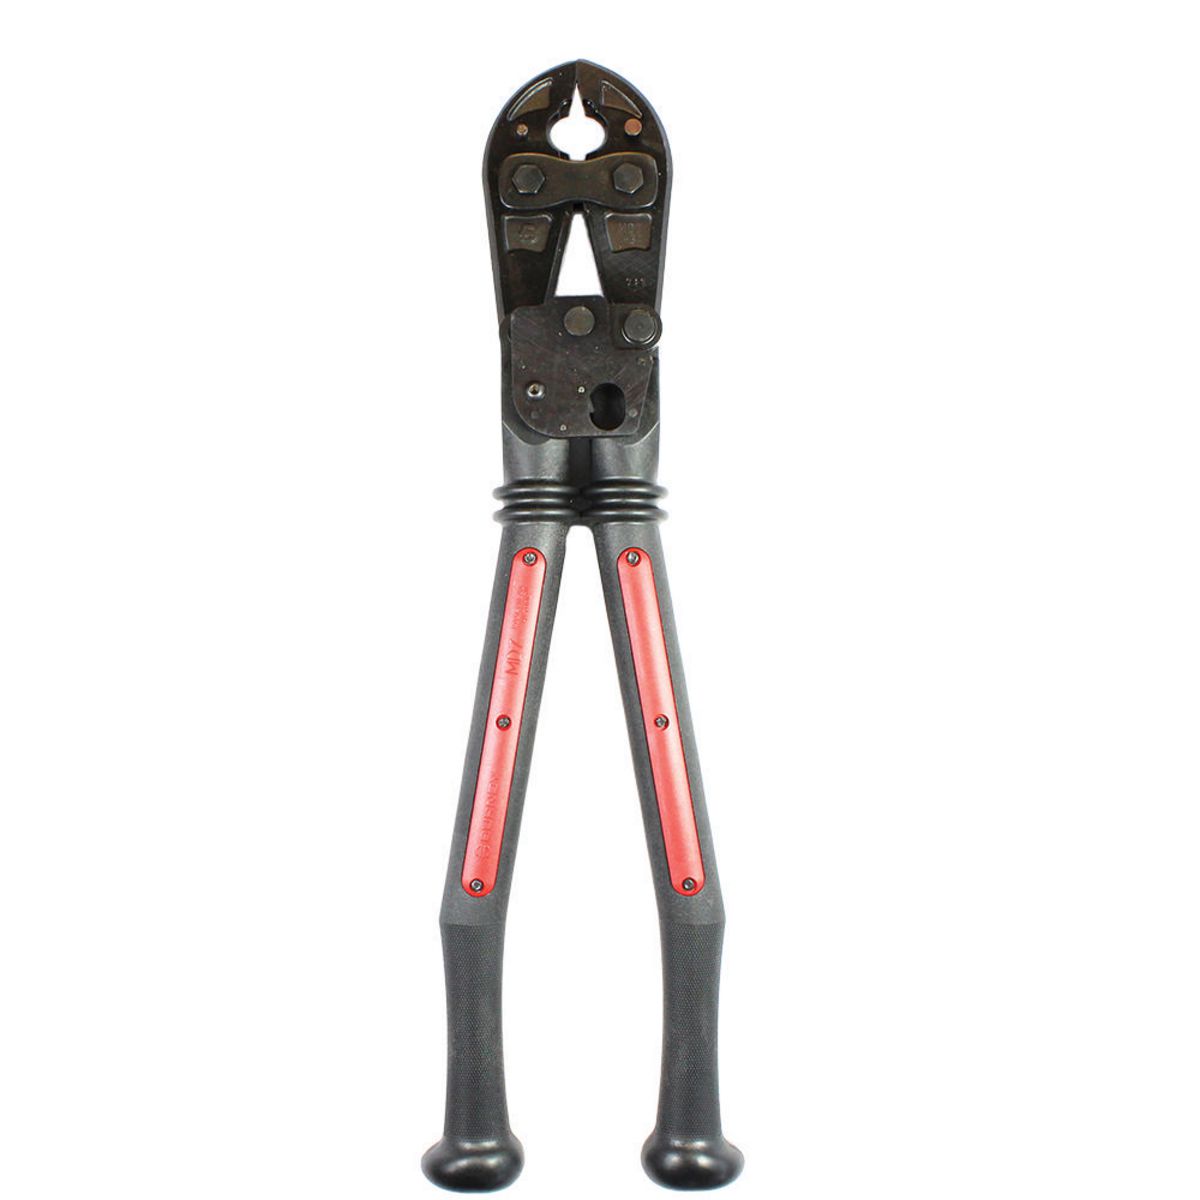 HYTOOL™ Operated Full Cycle Ratchet Crimper, Polymer Handles, Metal Case, Dies for #8 AWG-500 kcmil Copper and AWG-3/0 C-Taps | MD734RKIT1 | Burndy